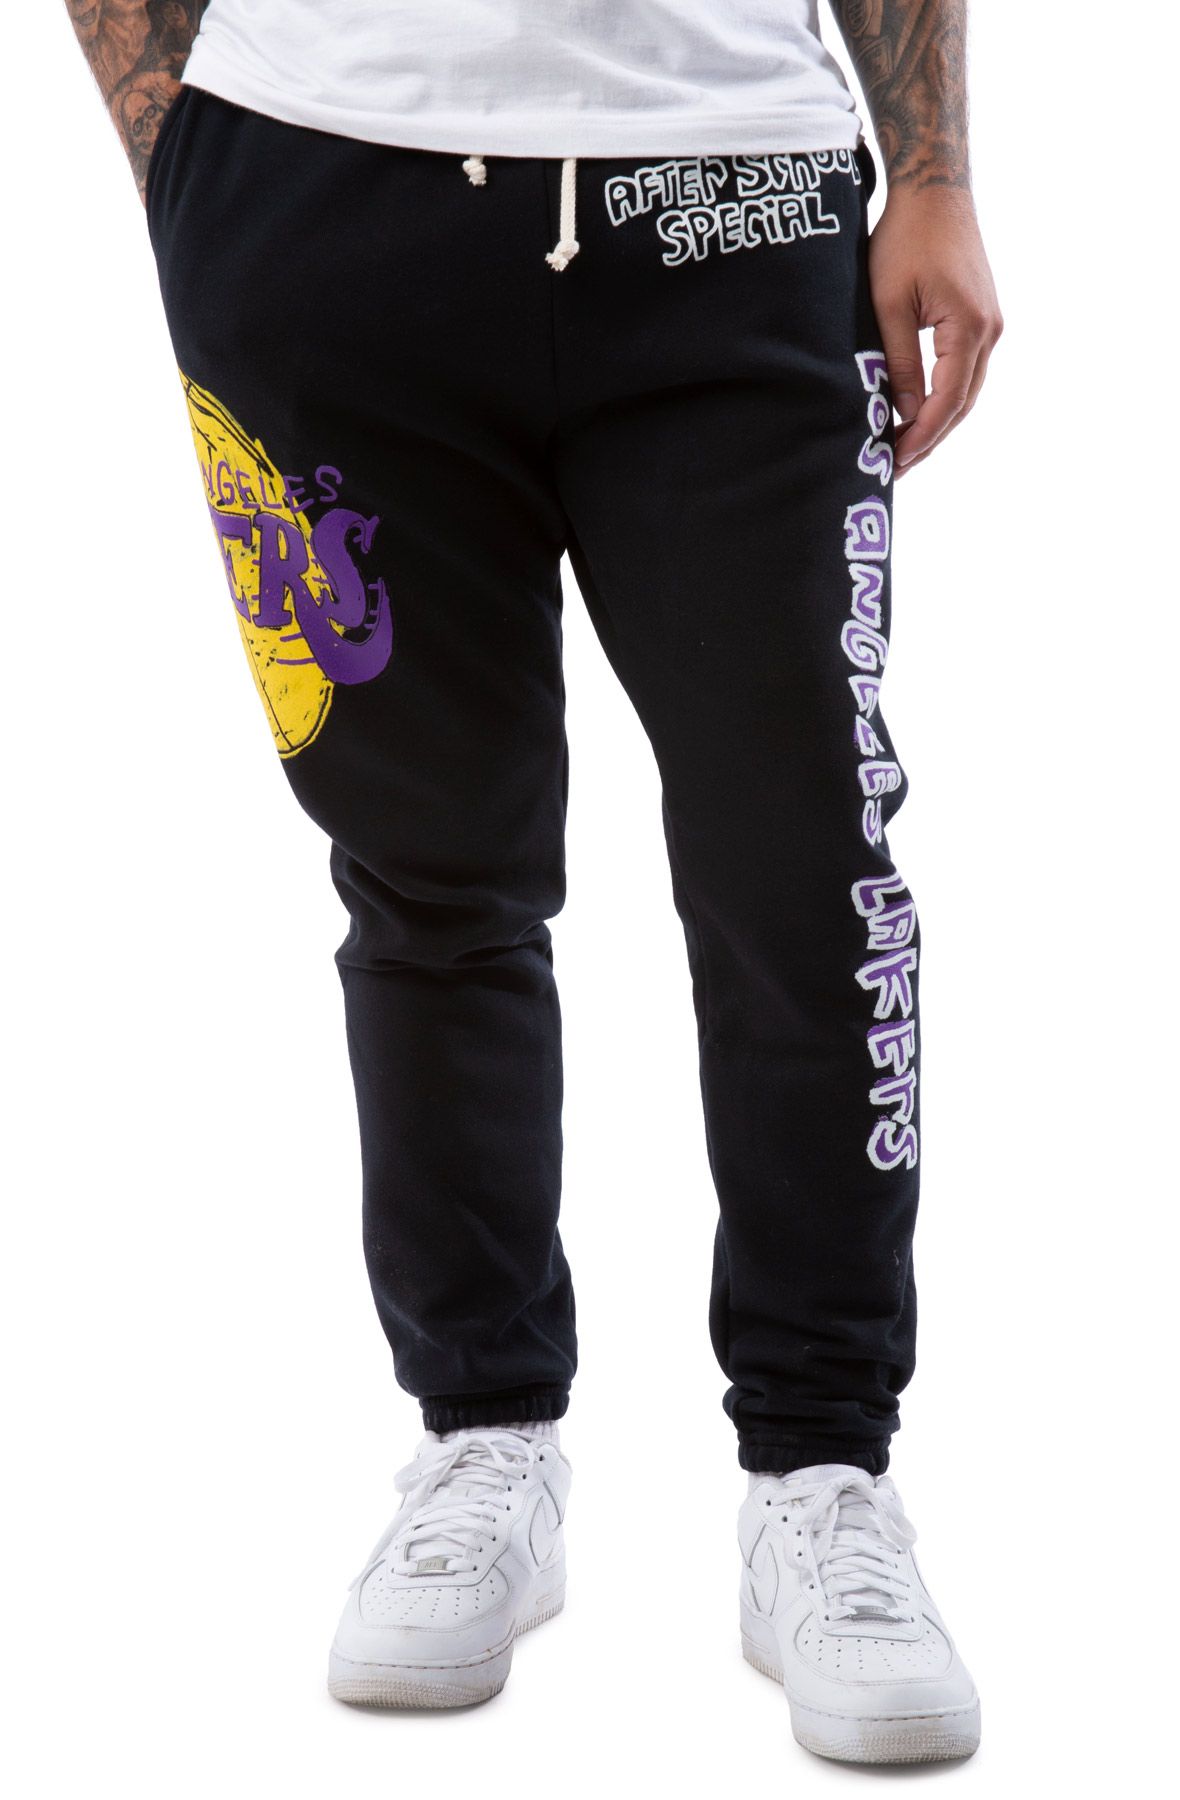 Men's Los Angeles Lakers After School Special White Sweatpants